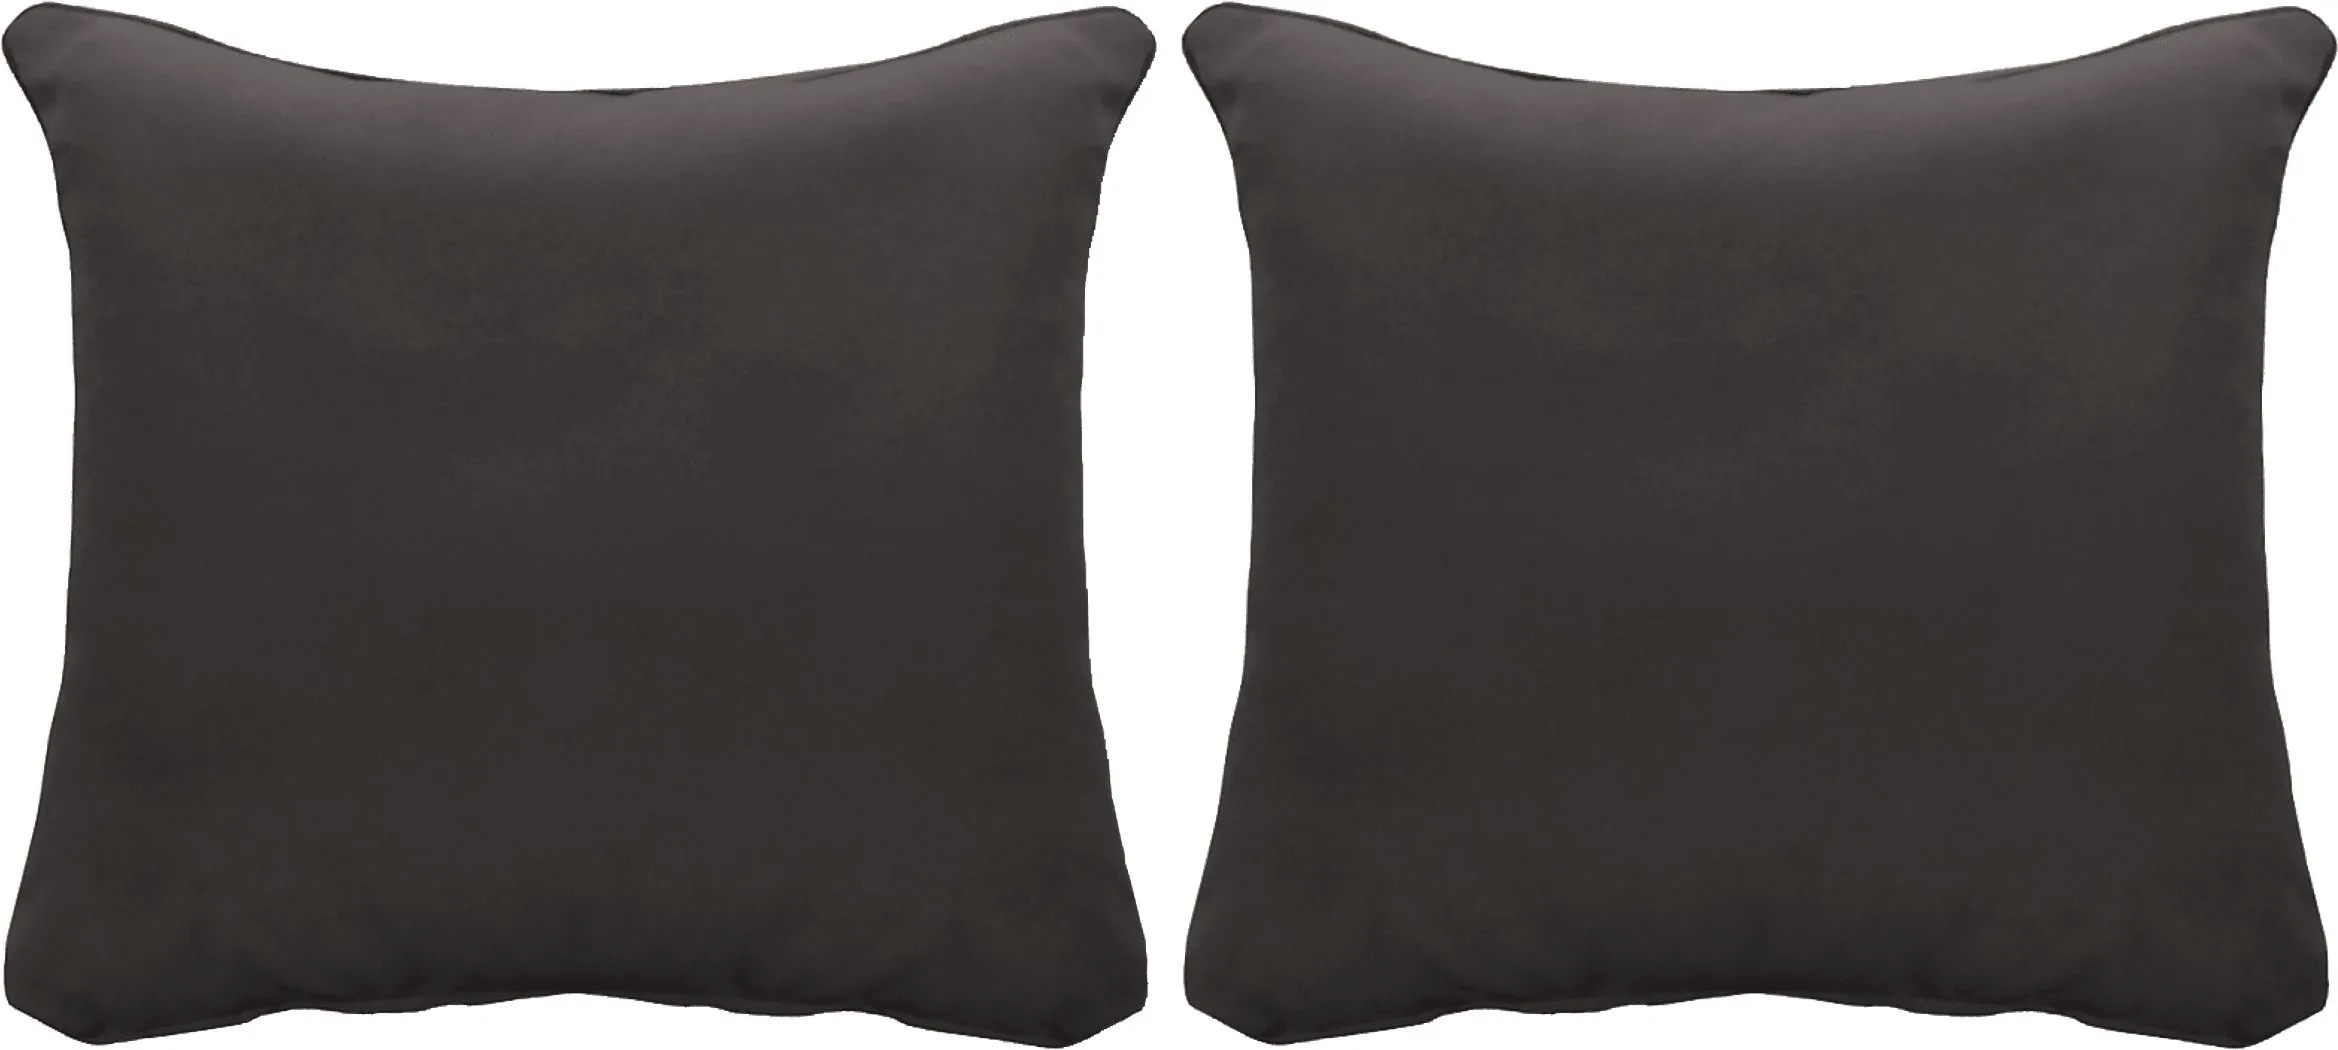 iSofa Slate Accent Pillows (Set of 2)